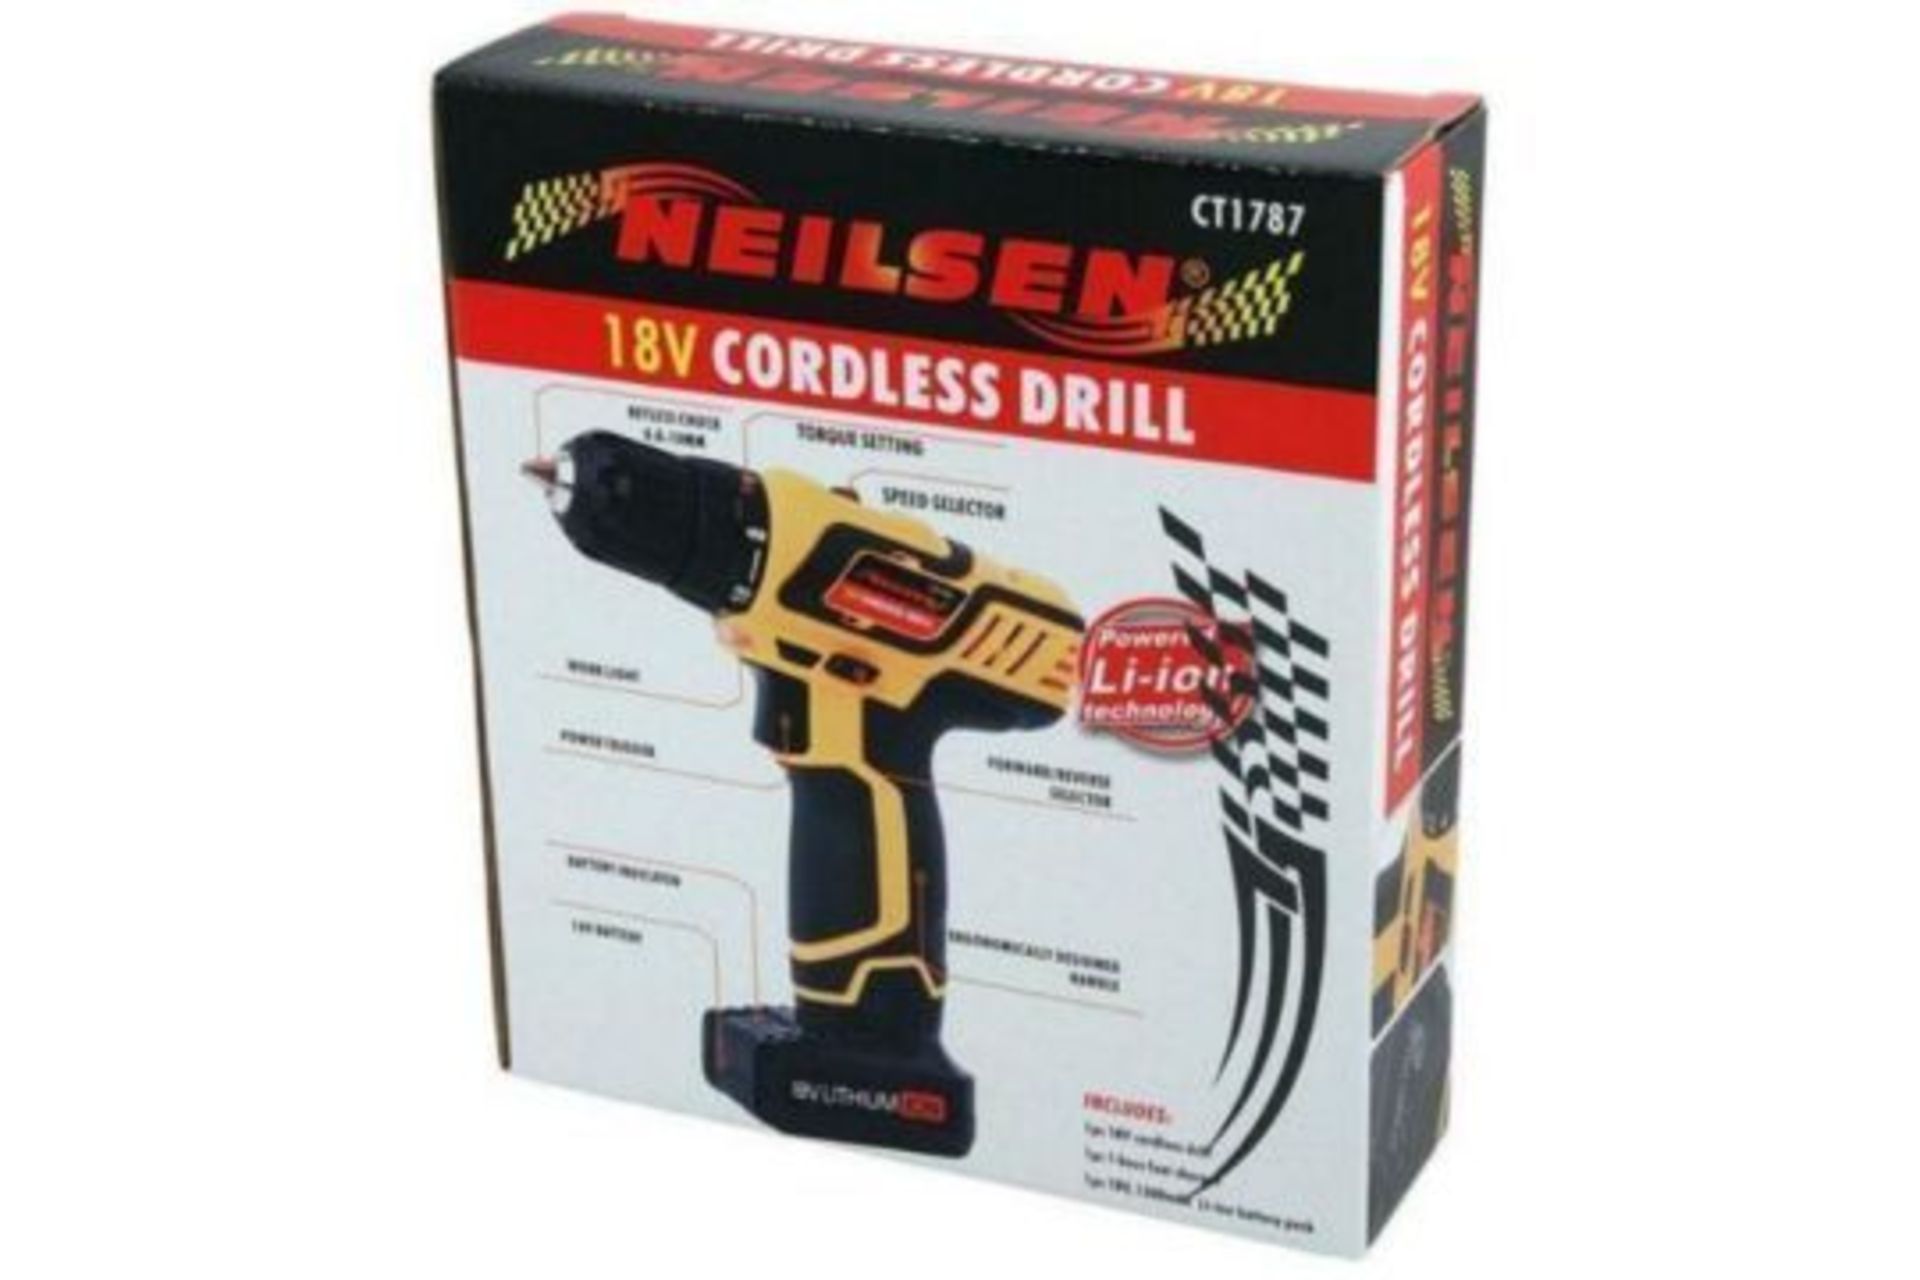 BRAND NEW NEILSEN 18V CORDLESS DRILL AND CHARGER - Image 3 of 3